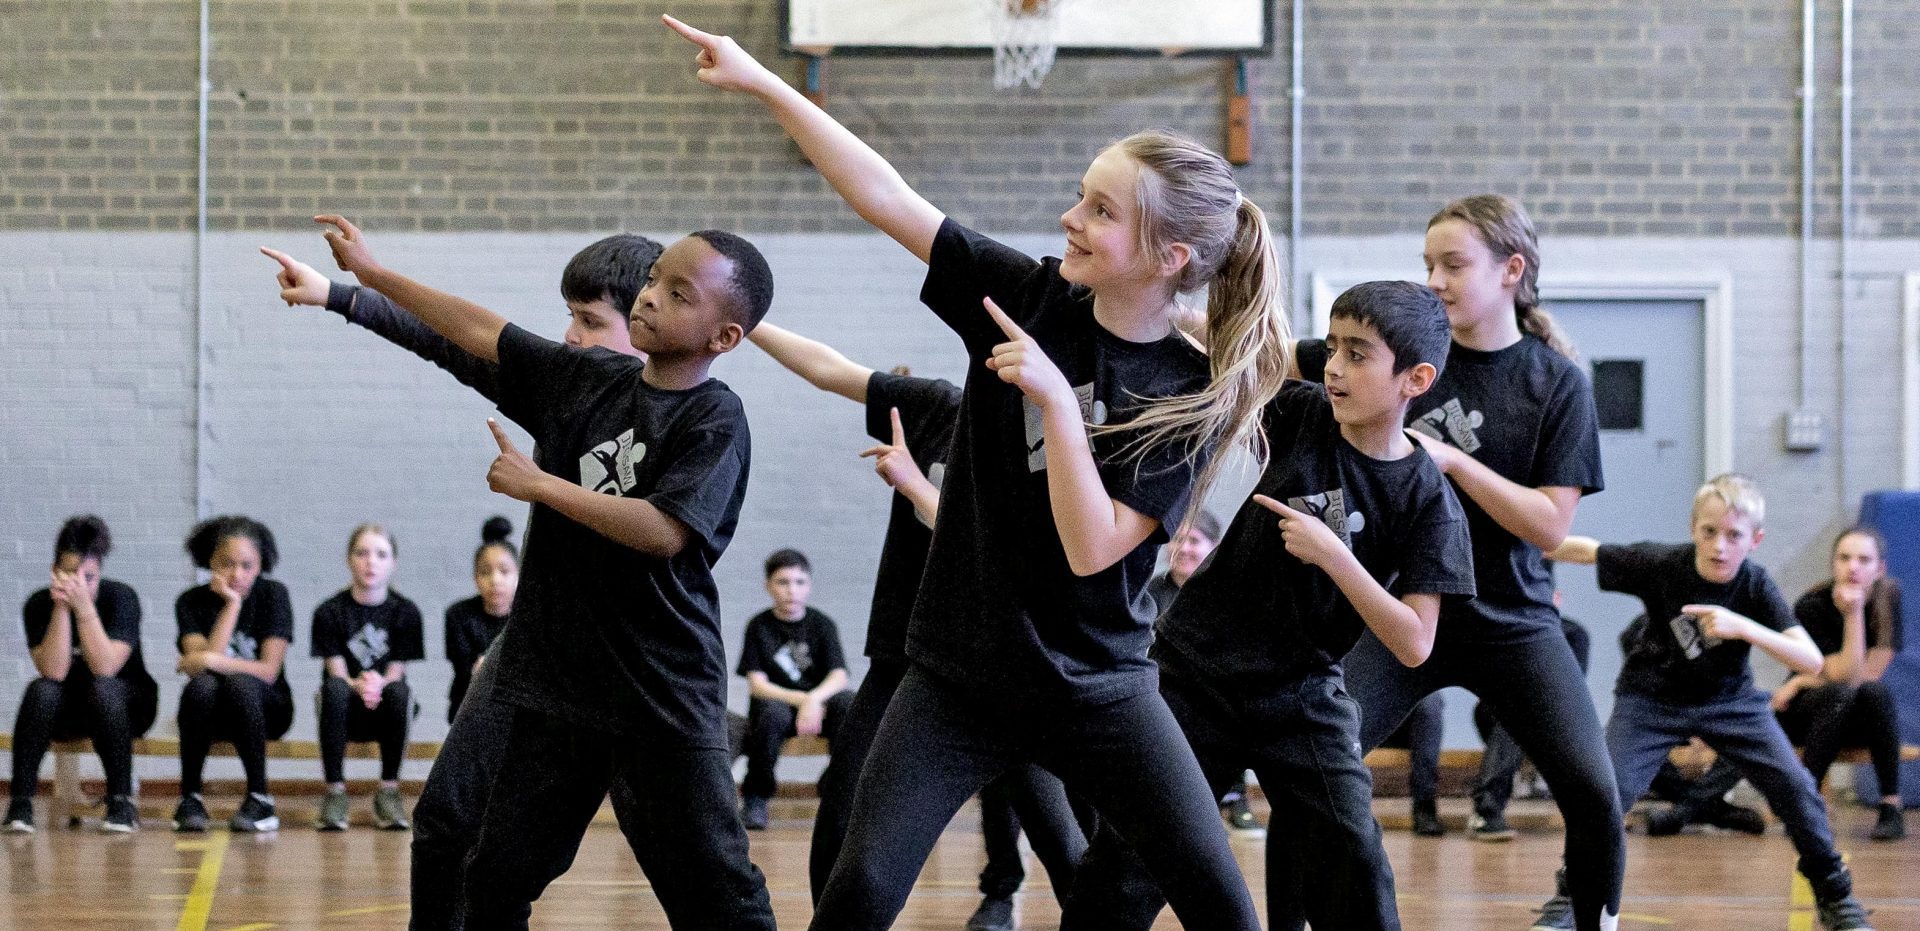 Dance Classes for 3 to 18 year olds - Jigsaw Performing Arts Schools